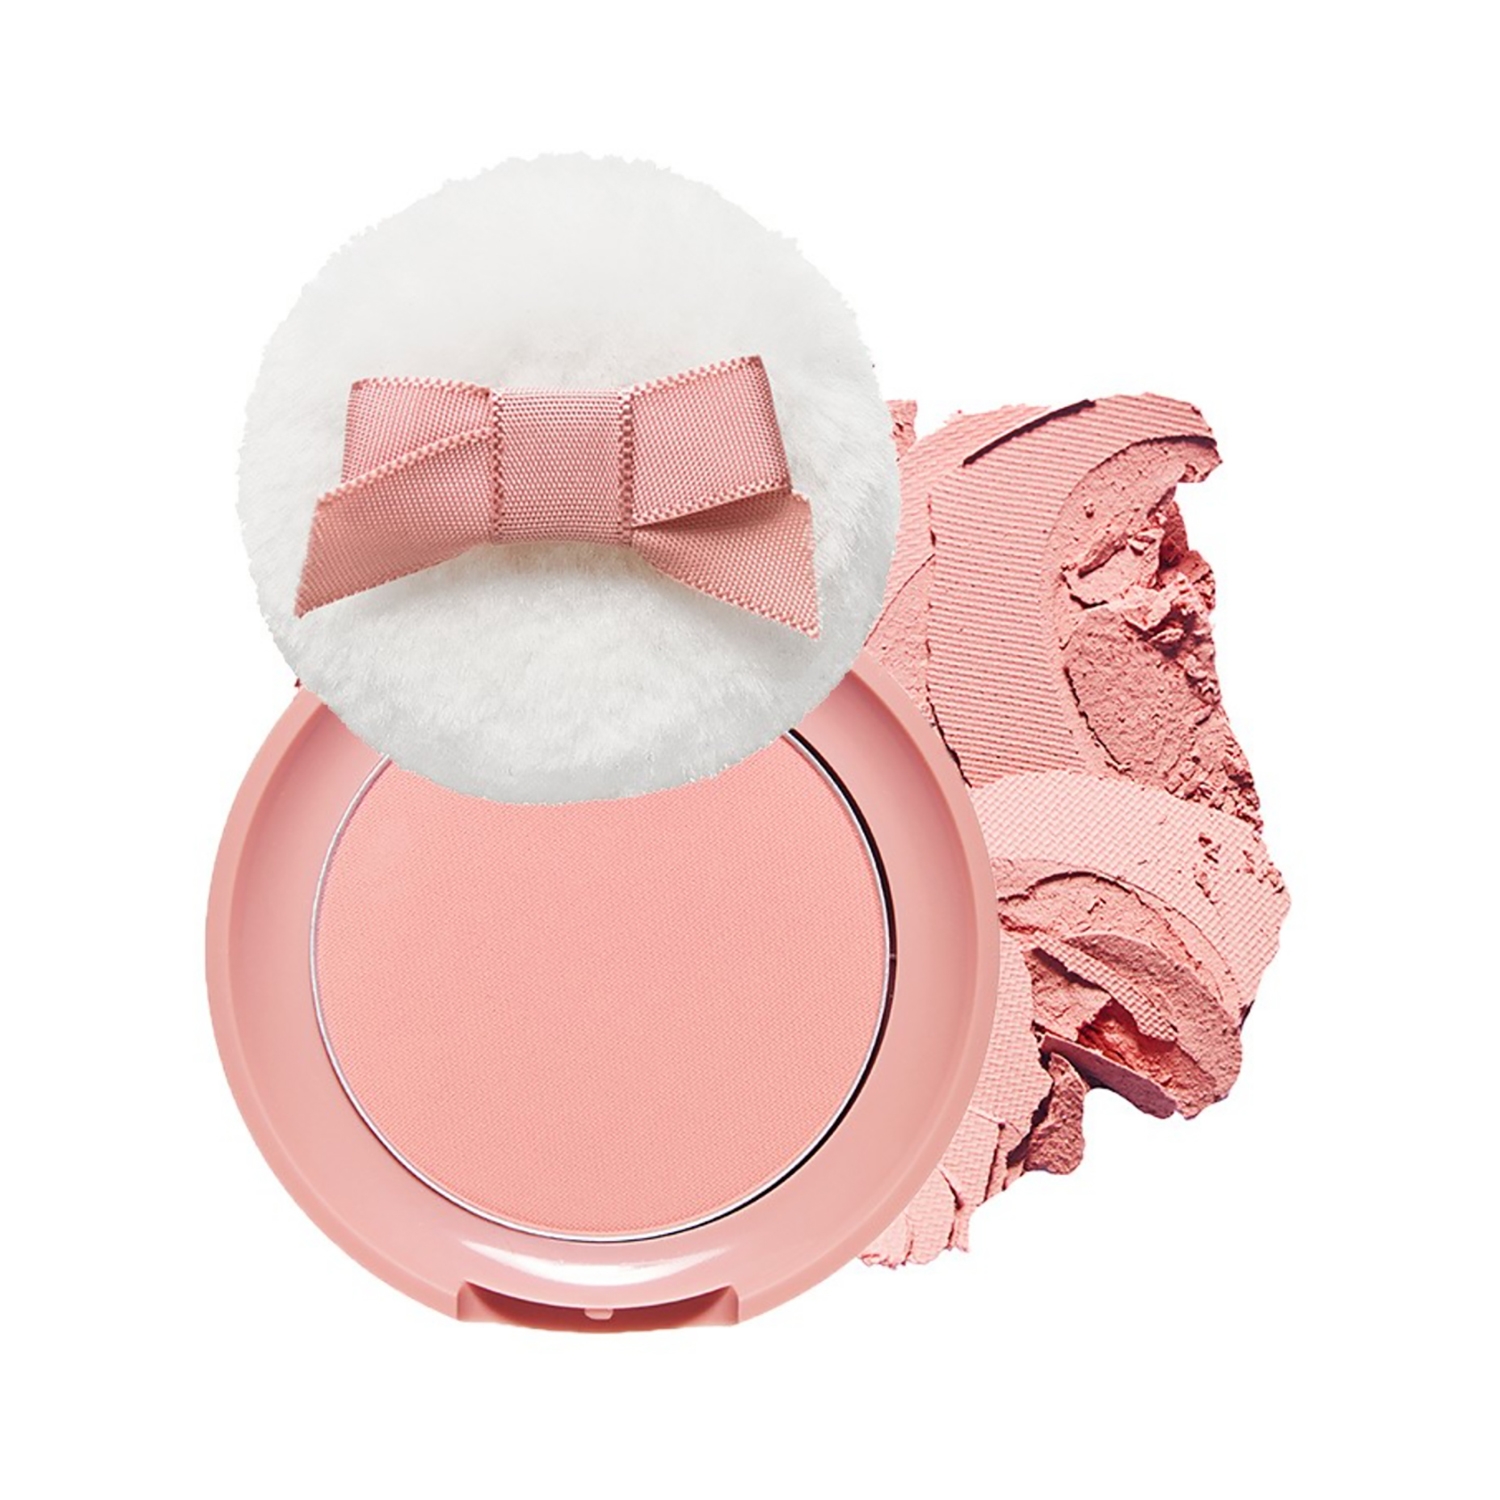 ETUDE HOUSE | ETUDE HOUSE Lovely Cookie Blusher - PK004 Peach Choux Wafers (4g)